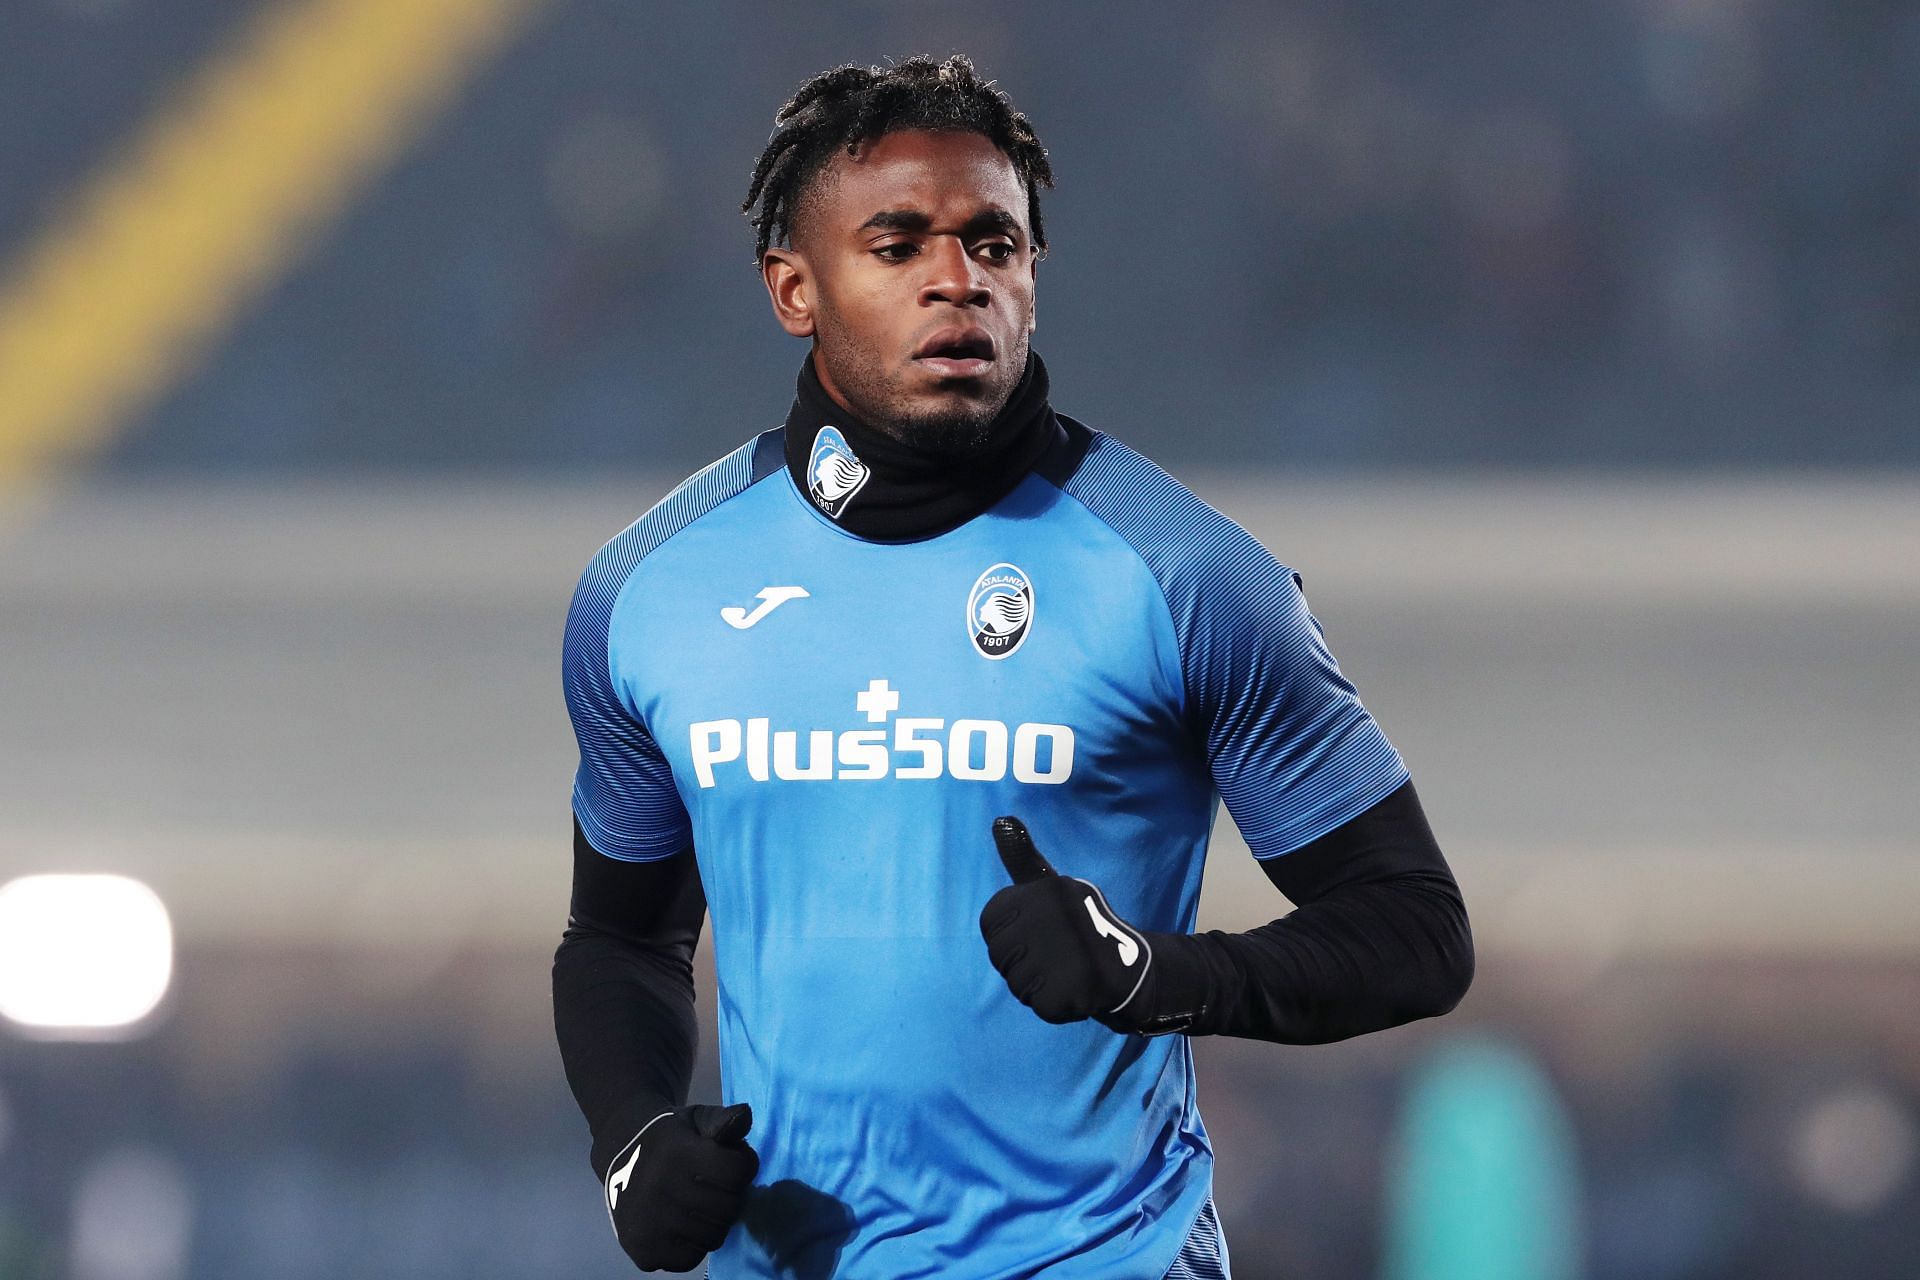 Zapata has had another prolific year in Serie A